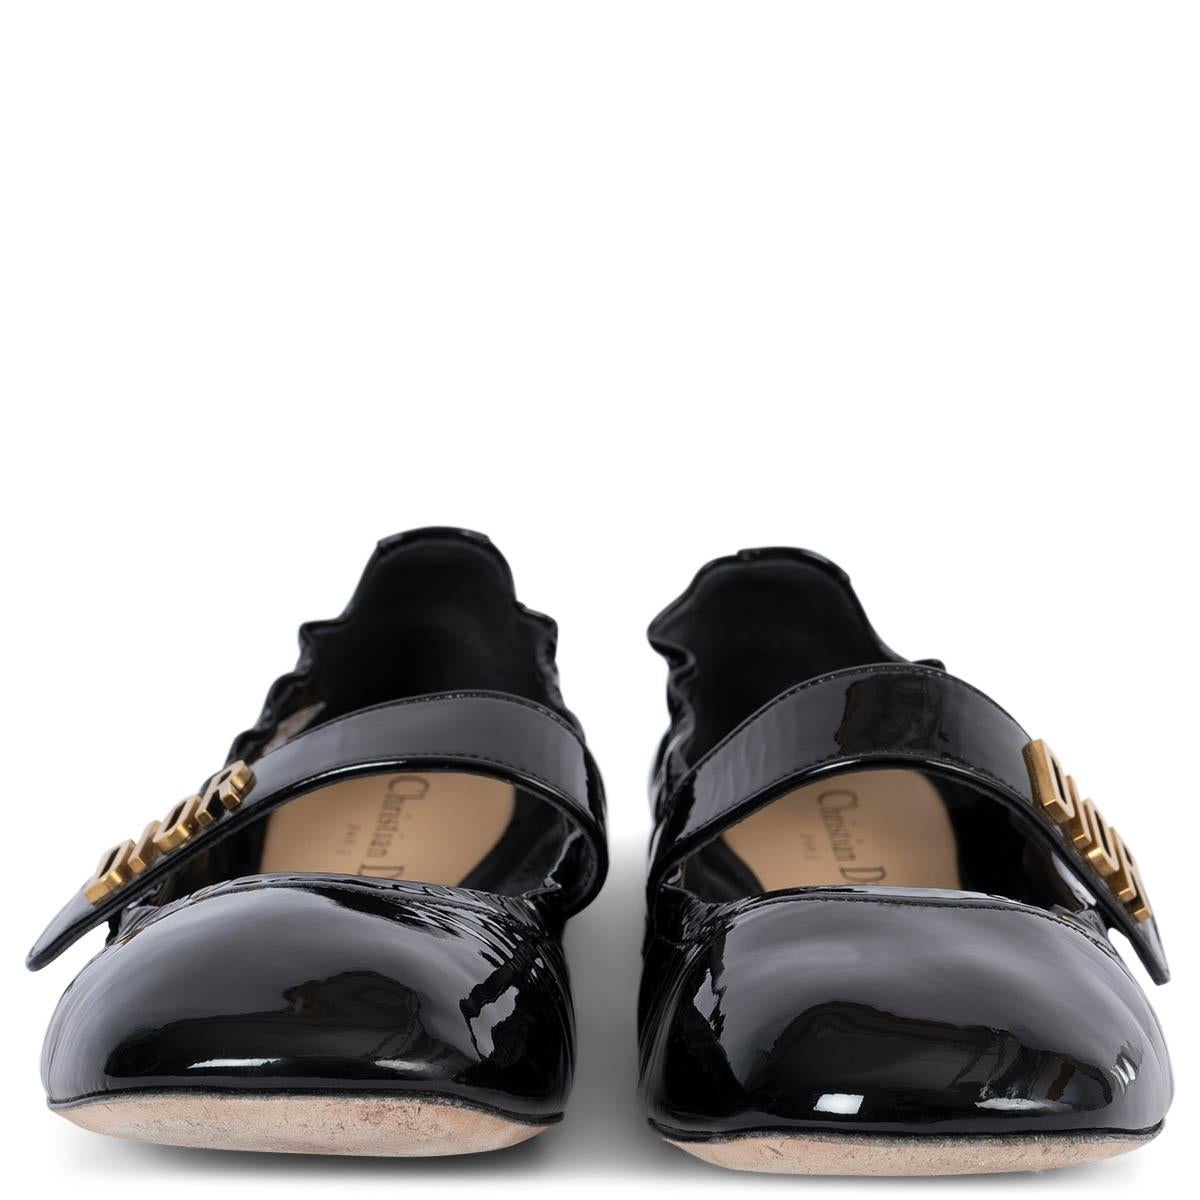 100% authentic Christian Dior Baby D- ballet flats in black patent leather featuring signature DIOR logo on the strap. Have been worn and are in excellent condition. Come with dust bag. 

Measurements
Model	KCB444LABS900
Imprinted Size	39
Shoe